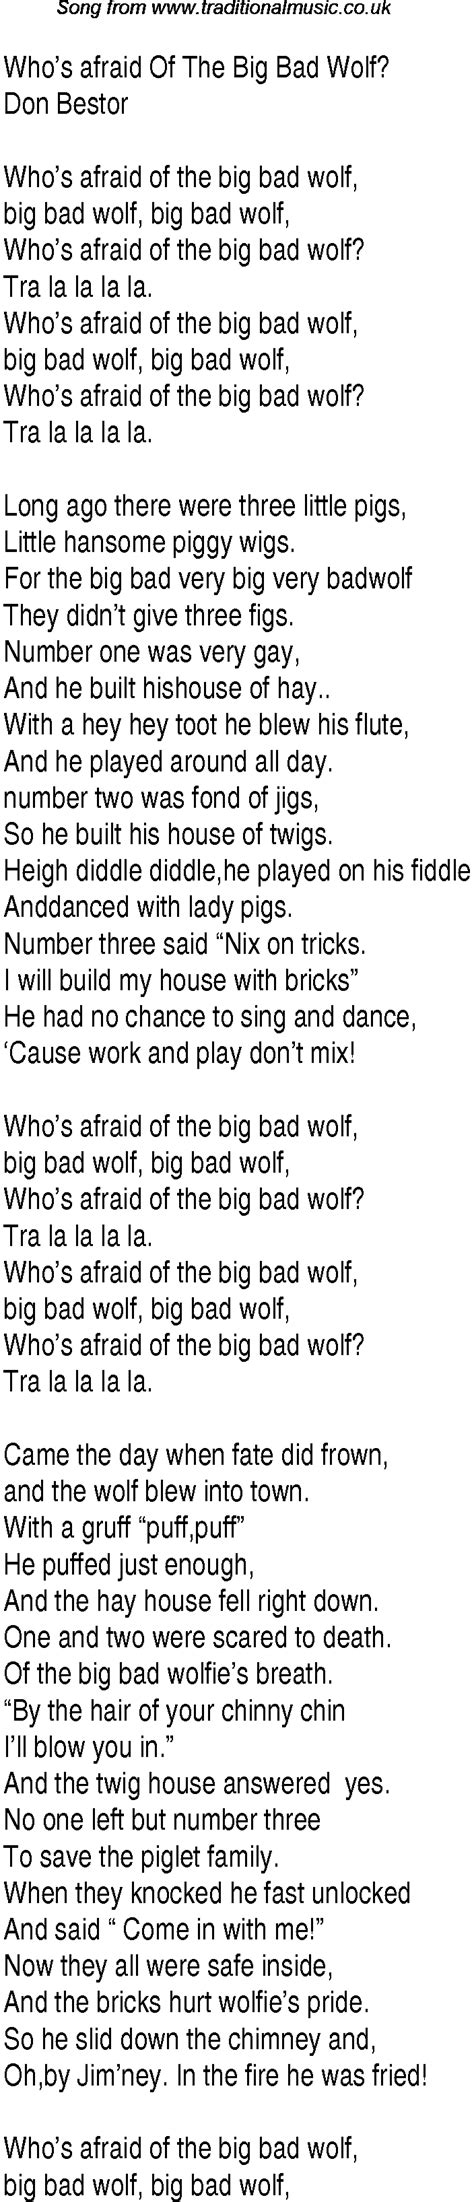 Top Songs Music Charts Lyrics For Whos Afraid Of The Big Bad Wolf